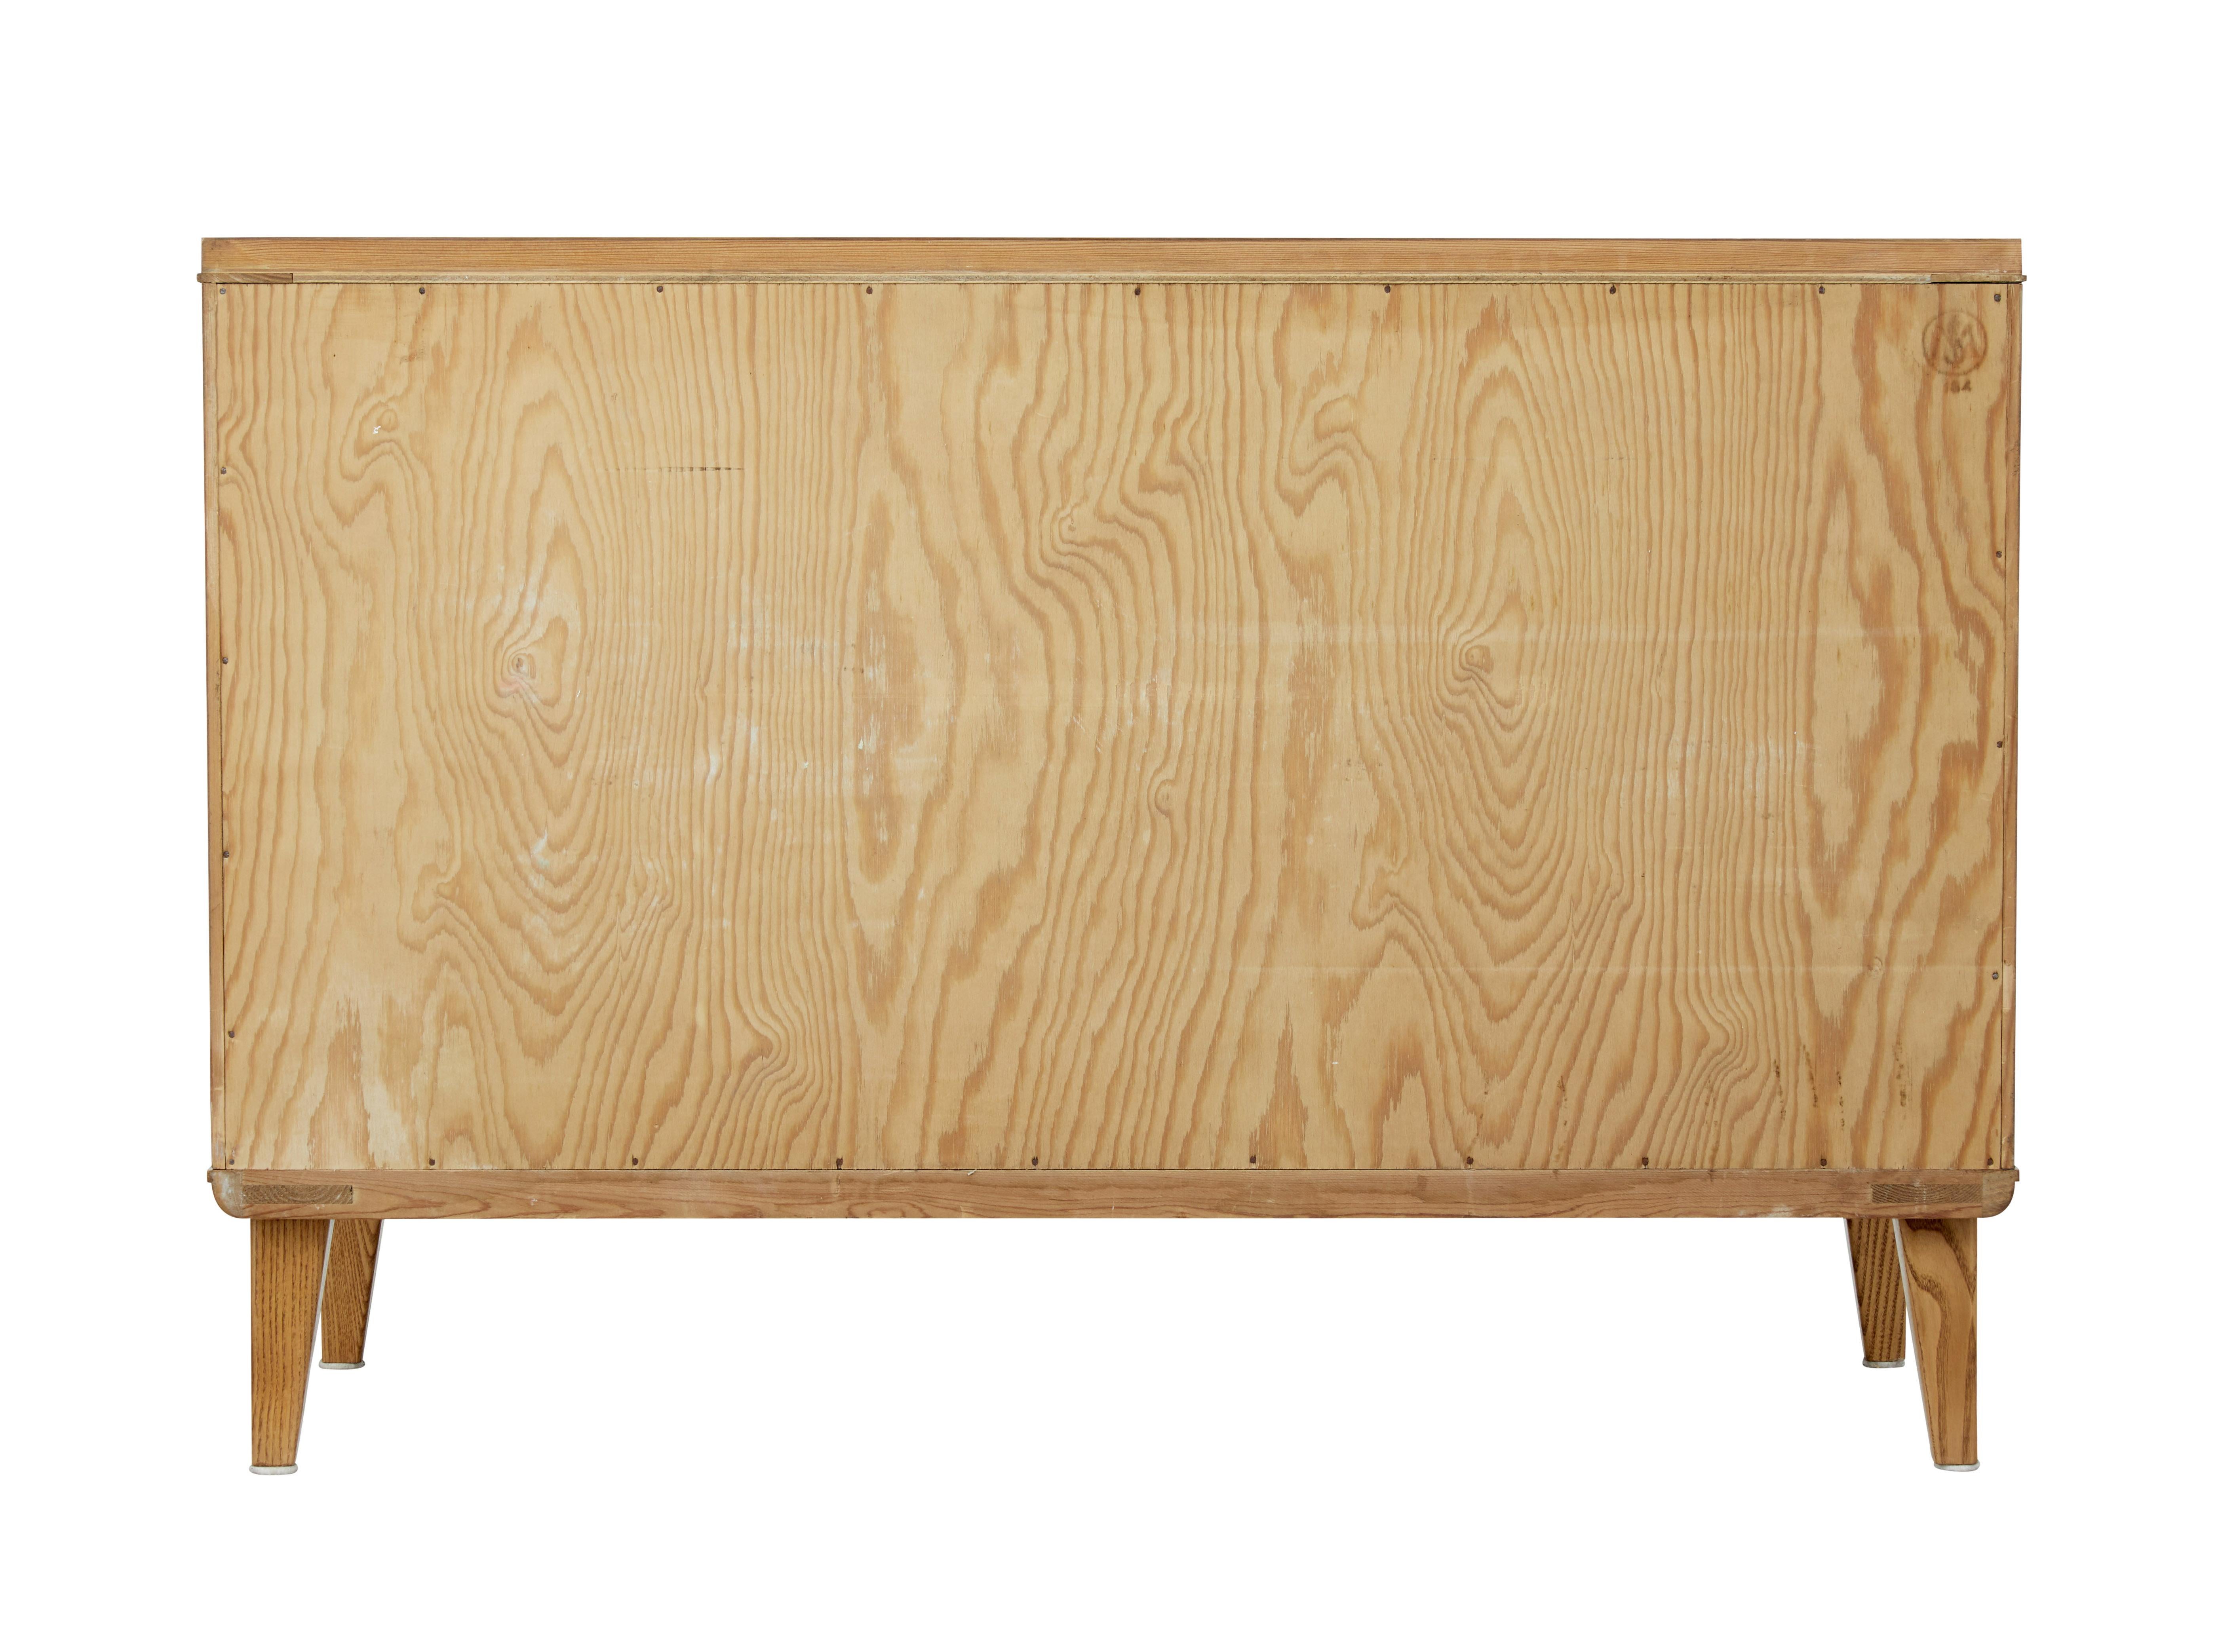 Hand-Crafted Mid-20th Century Elm Chest of Drawers by SMF Bodafors